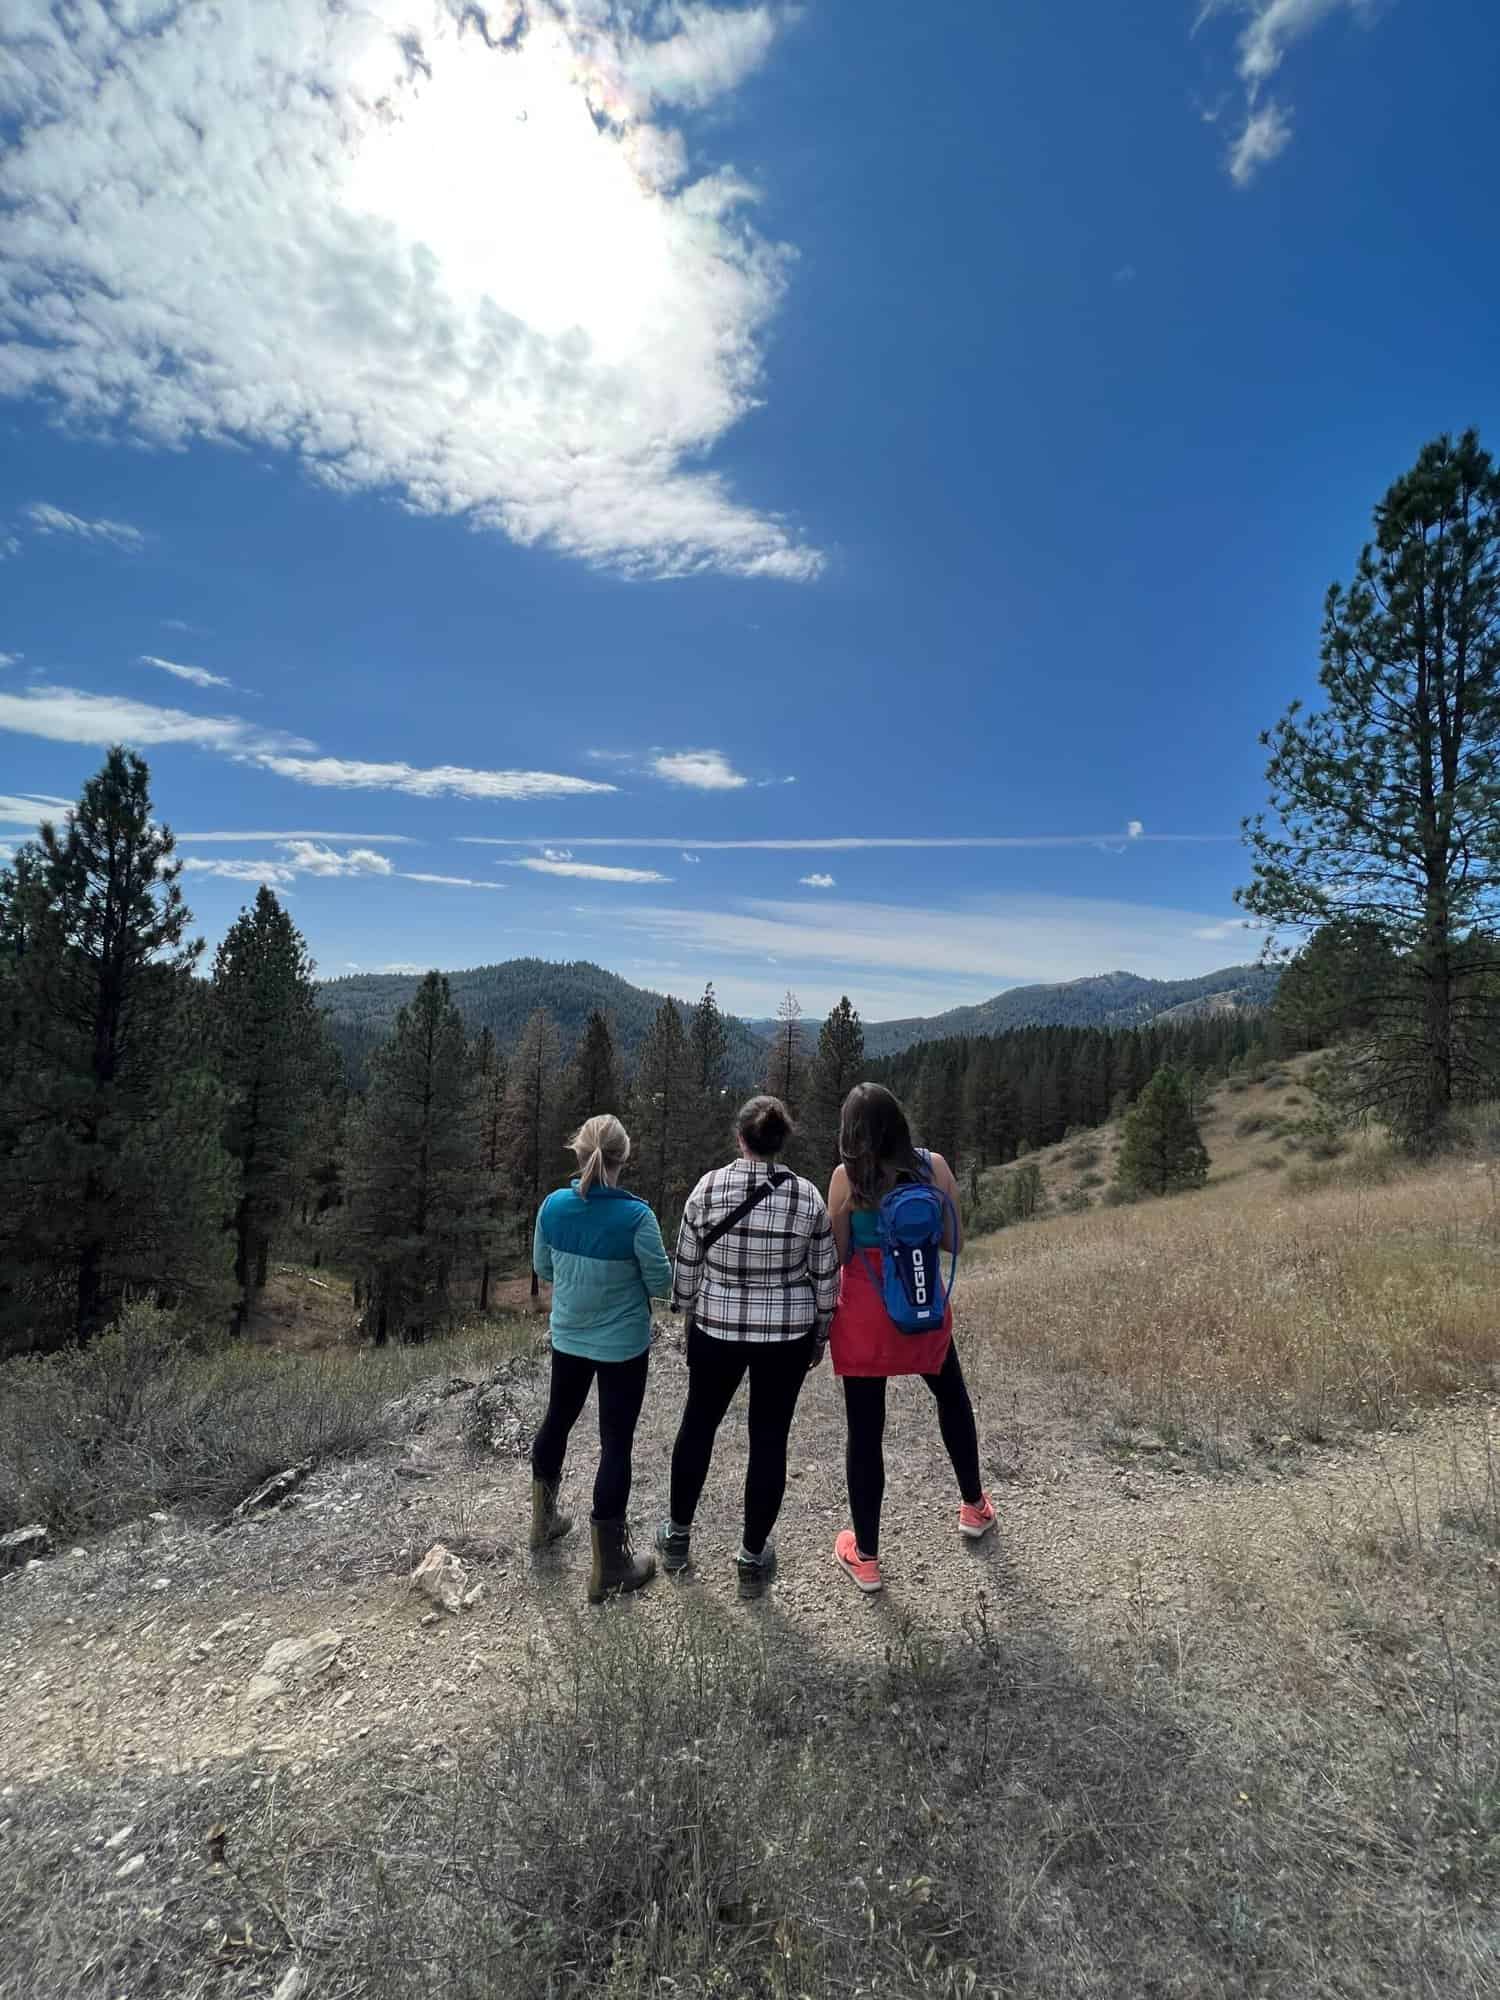 Women's History Month: Adventurers, Activists, and Nature-Lovers. Three women on a hiking trail looking down the mountain.